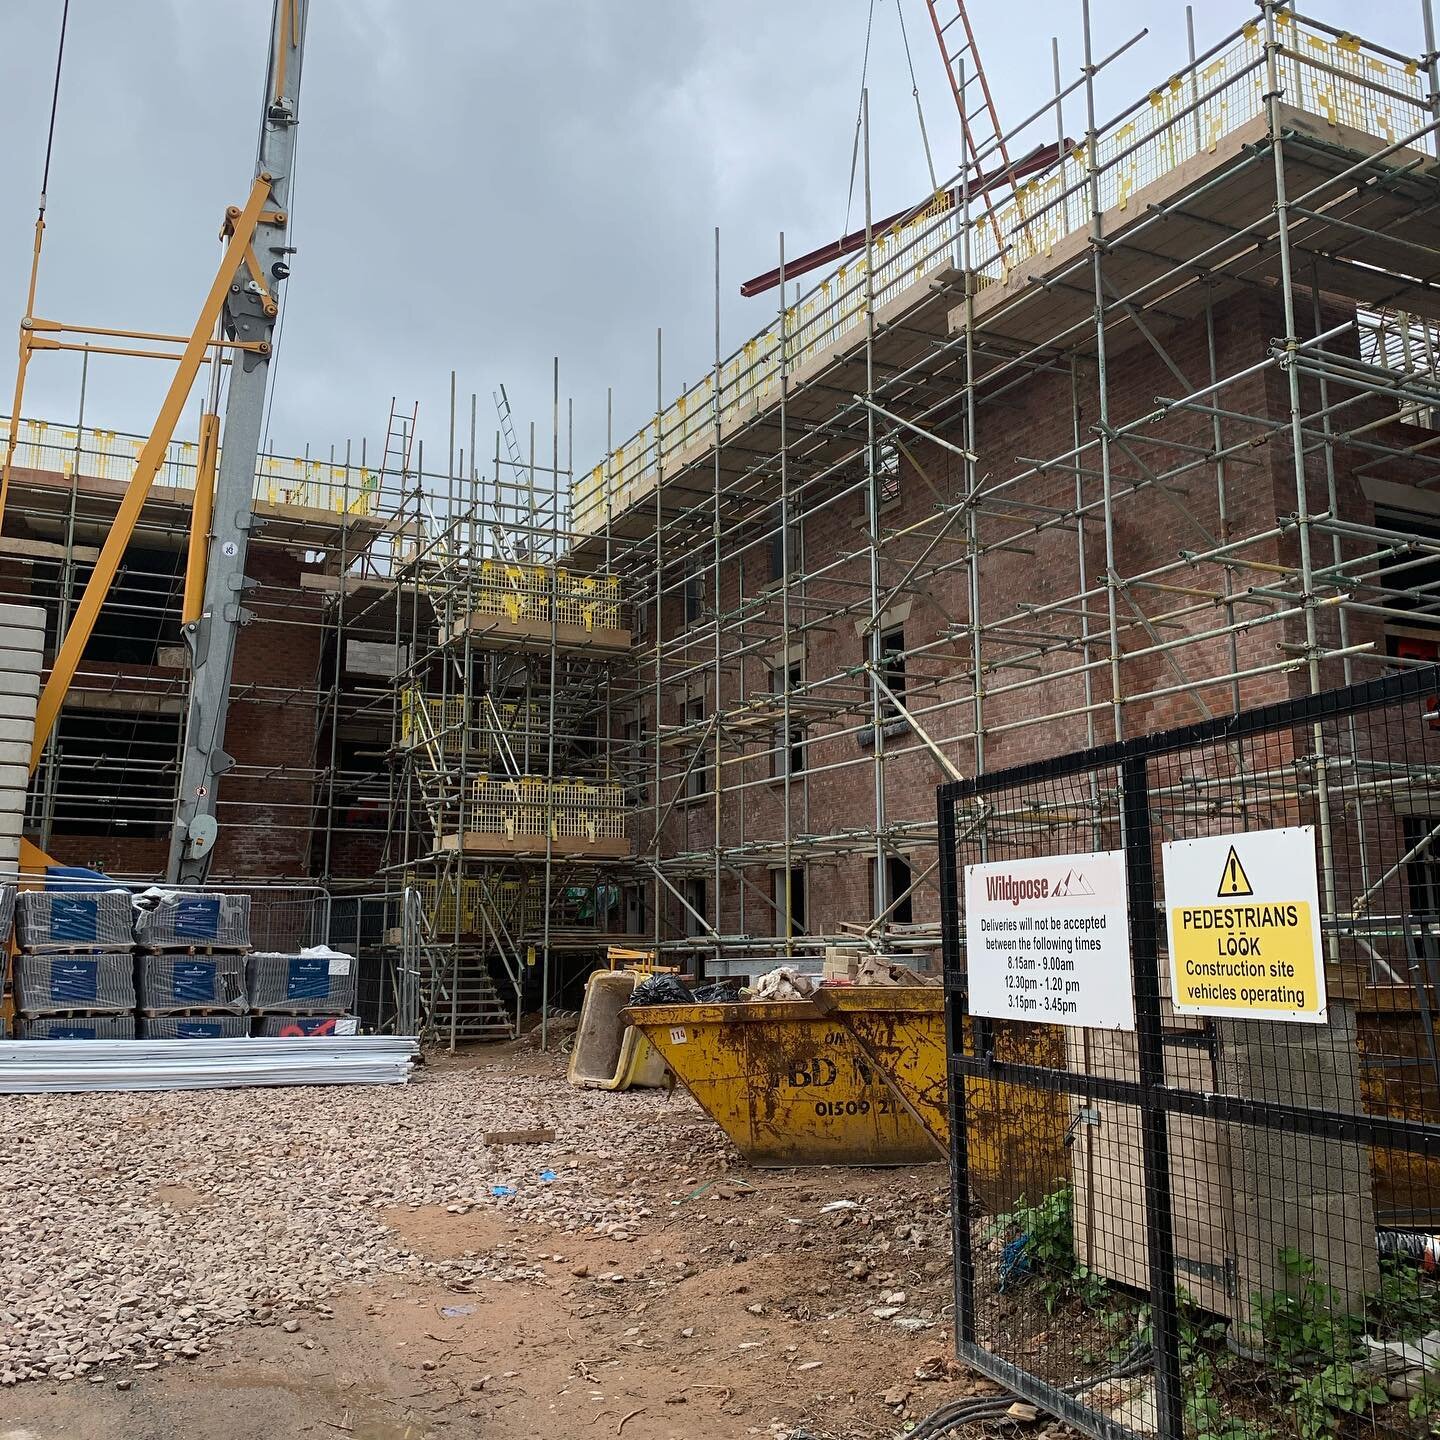 New Project starting - 62 bed care home for @wildgoosehomes in Leicester 

#drylining #plastering #carehome #leicester